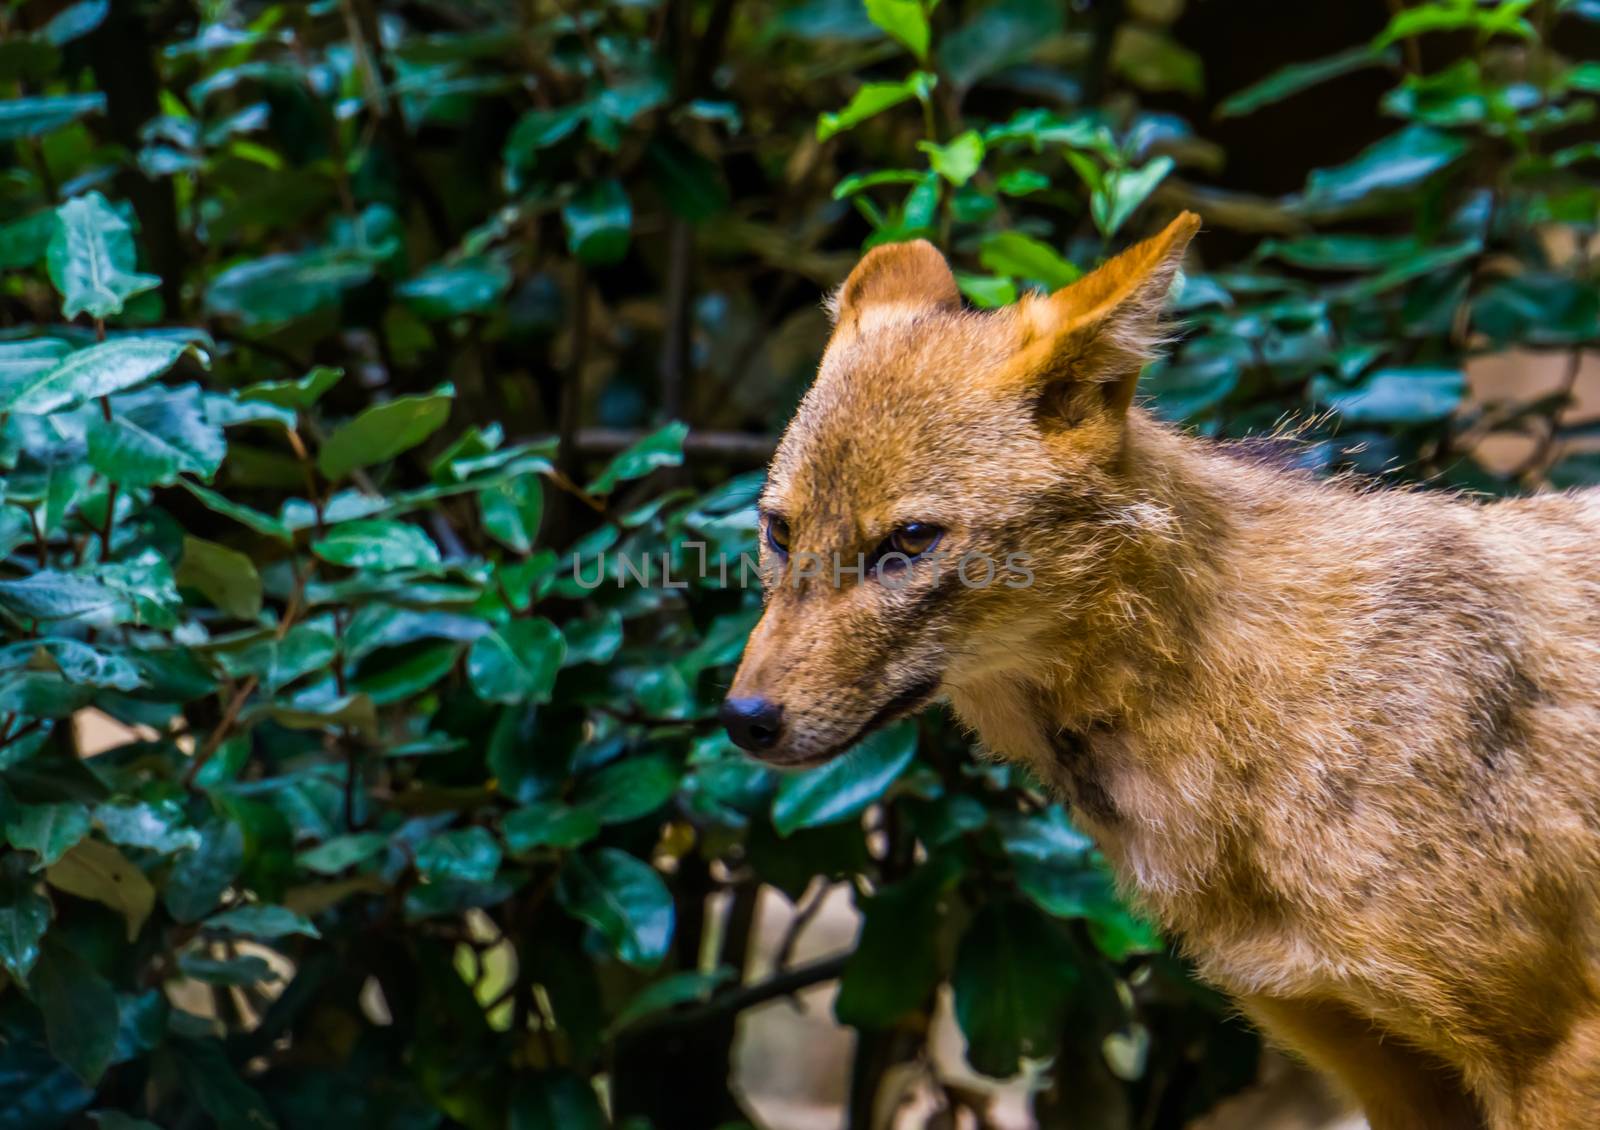 the face of a golden jackal in closeup, wild dog specie from Eurasia